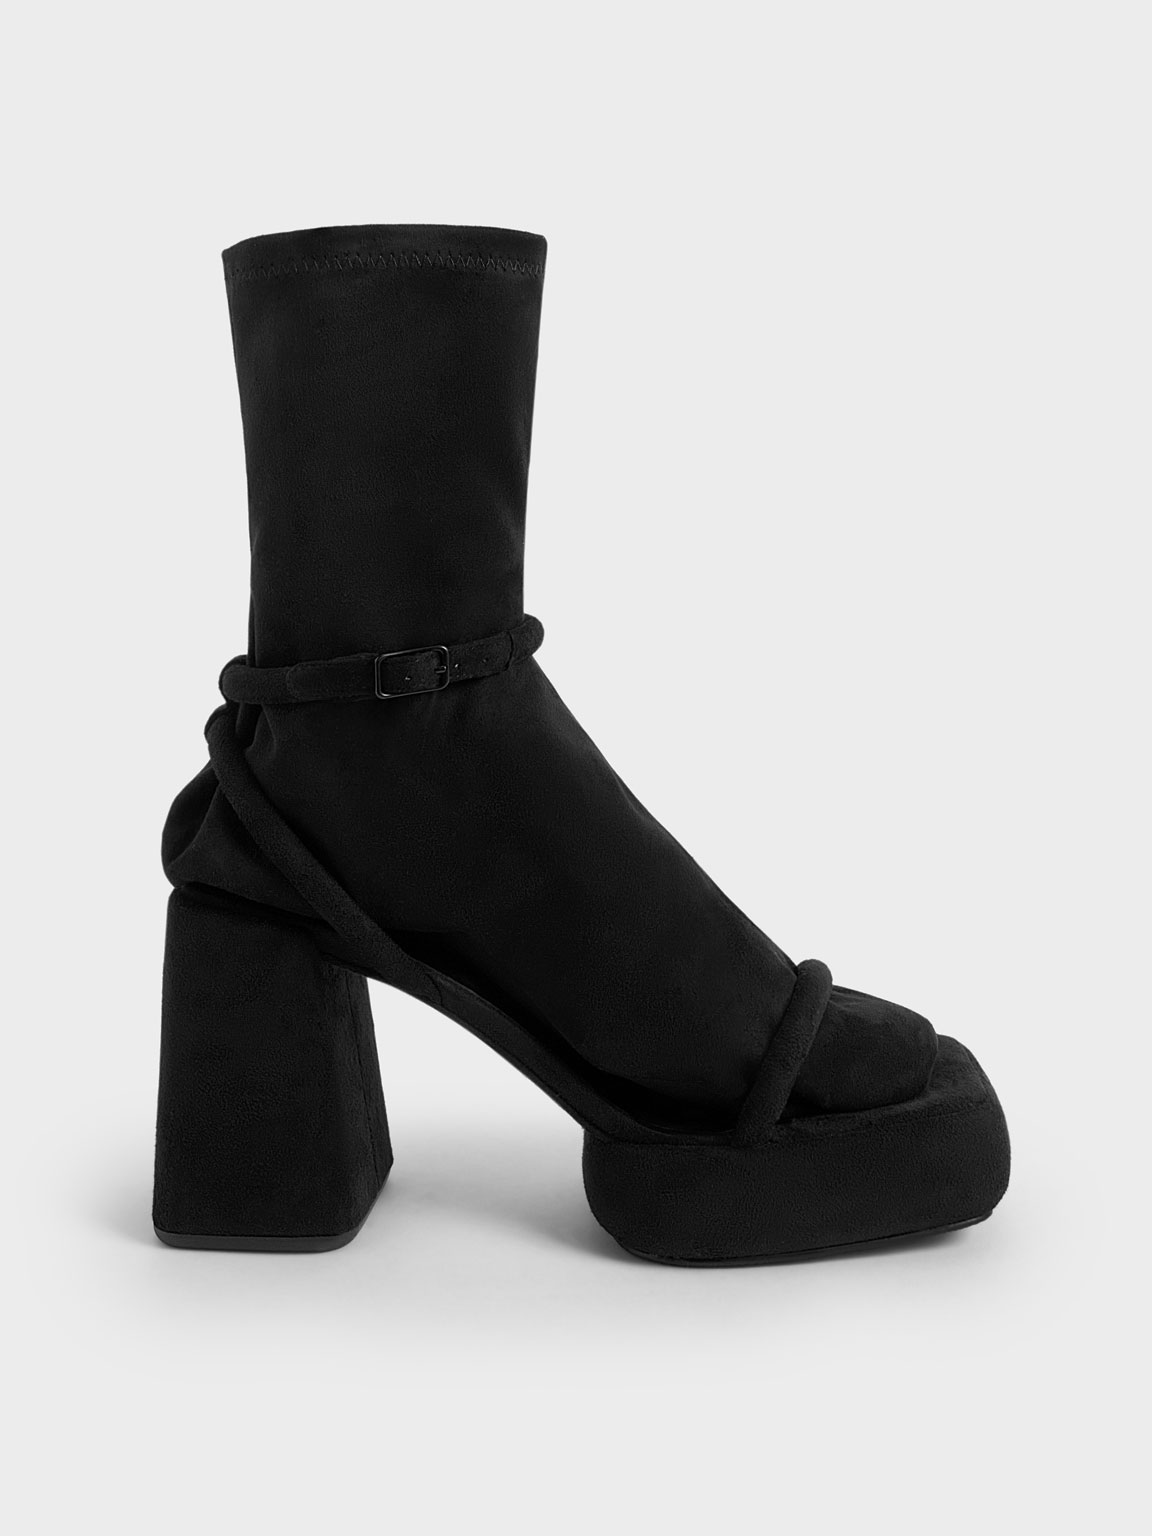 Charles & Keith Lucile Textured Platform Calf Boots In Black Textured